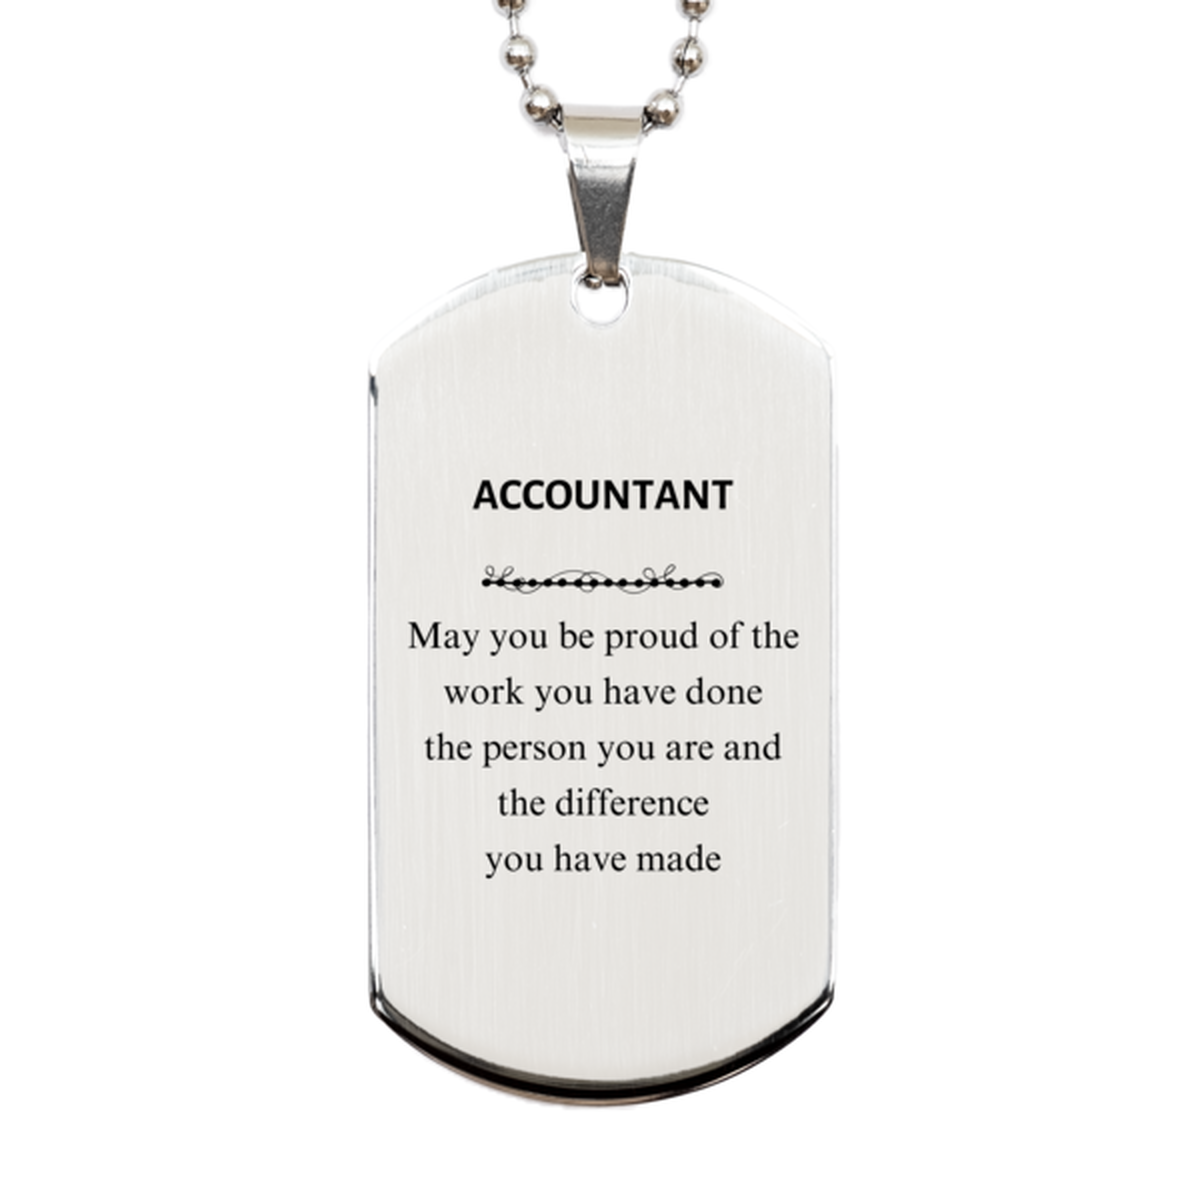 Accountant May you be proud of the work you have done, Retirement Accountant Silver Dog Tag for Colleague Appreciation Gifts Amazing for Accountant